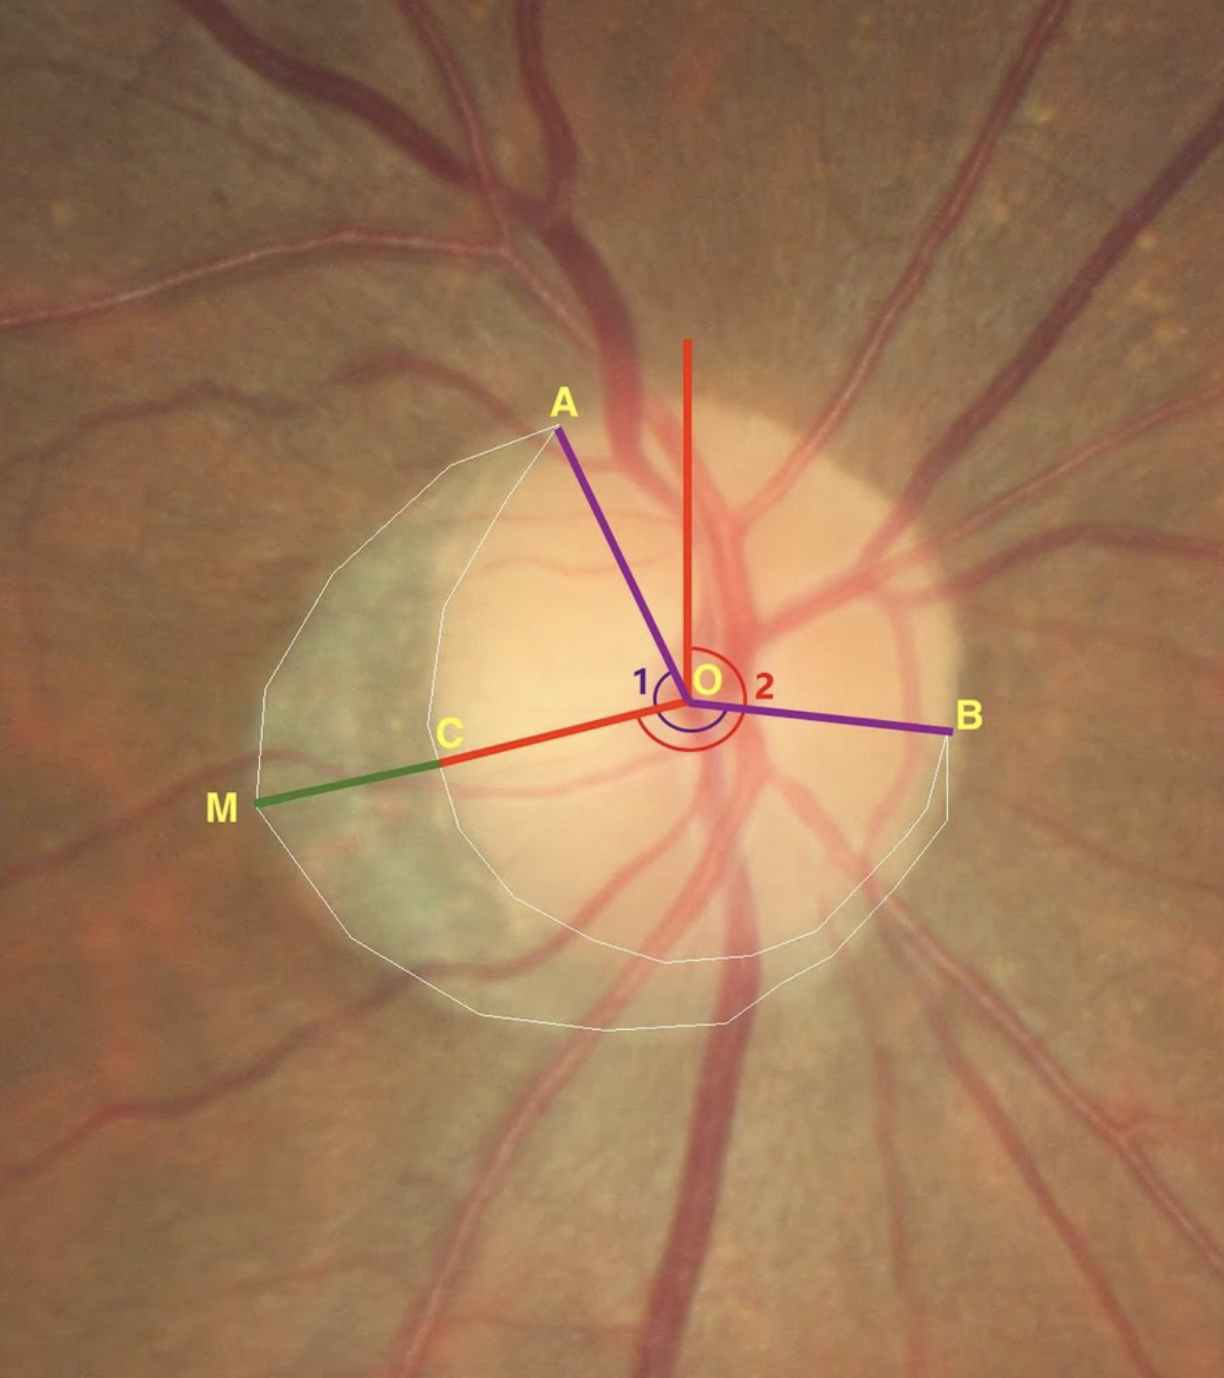 In a retrospective cohort study conducted in South Korea, researchers found longer radial extent and larger angular extent of beta-zone parapapillary atrophy were significantly associated in progression, suggesting this could be a predictive tool used in clinical practice. In this image (from a different study), point O is the center of the disc, and point A and B is the vertices of the beta zone, the point M and C is the maximum radial extent on the beta zone margin and disc margin. The beta zone is the area inside the white line, circumferential angle of the beta zone was defined as the angle between point A and B (angle 1), location of the beta zone was defined as the angle between maximum radial extent and vertical line from the center point of disc (angle 2), distance from C to M was defined as maximum radial extent of the beta zone.